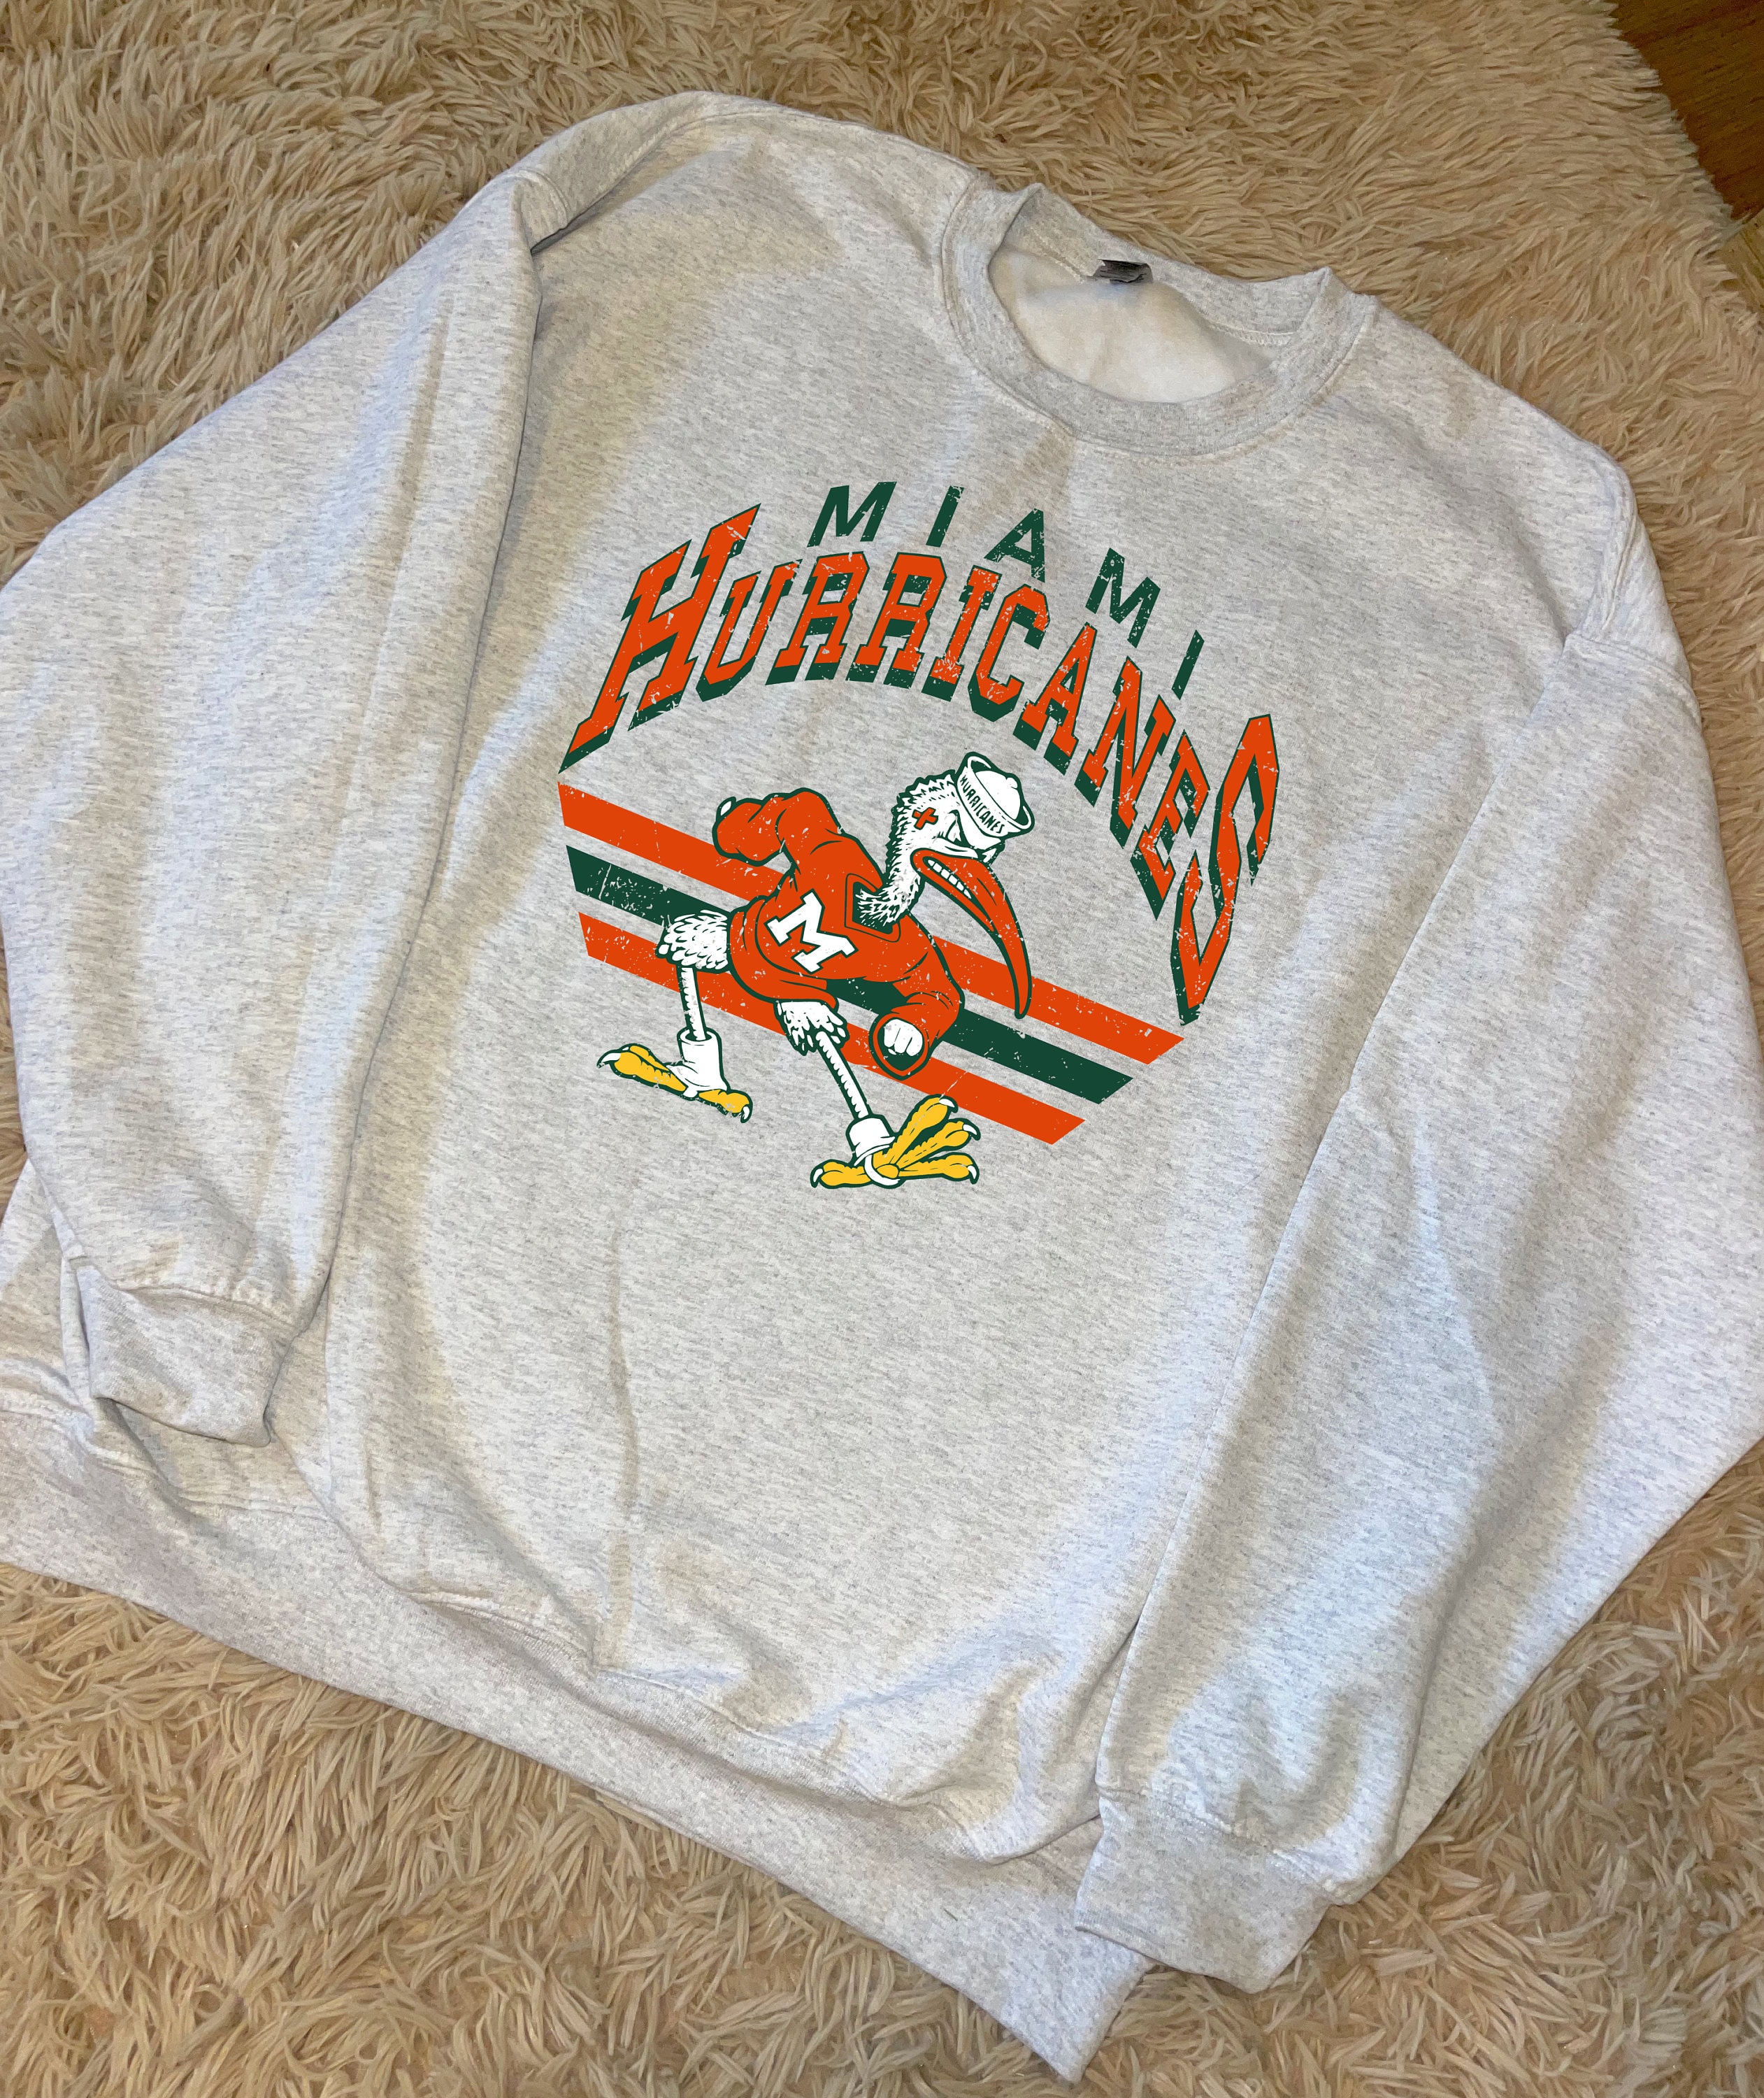  Retro Vintage Hurricane Party Look Tailgate Gameday Fan Gift  Raglan Baseball Tee : Clothing, Shoes & Jewelry